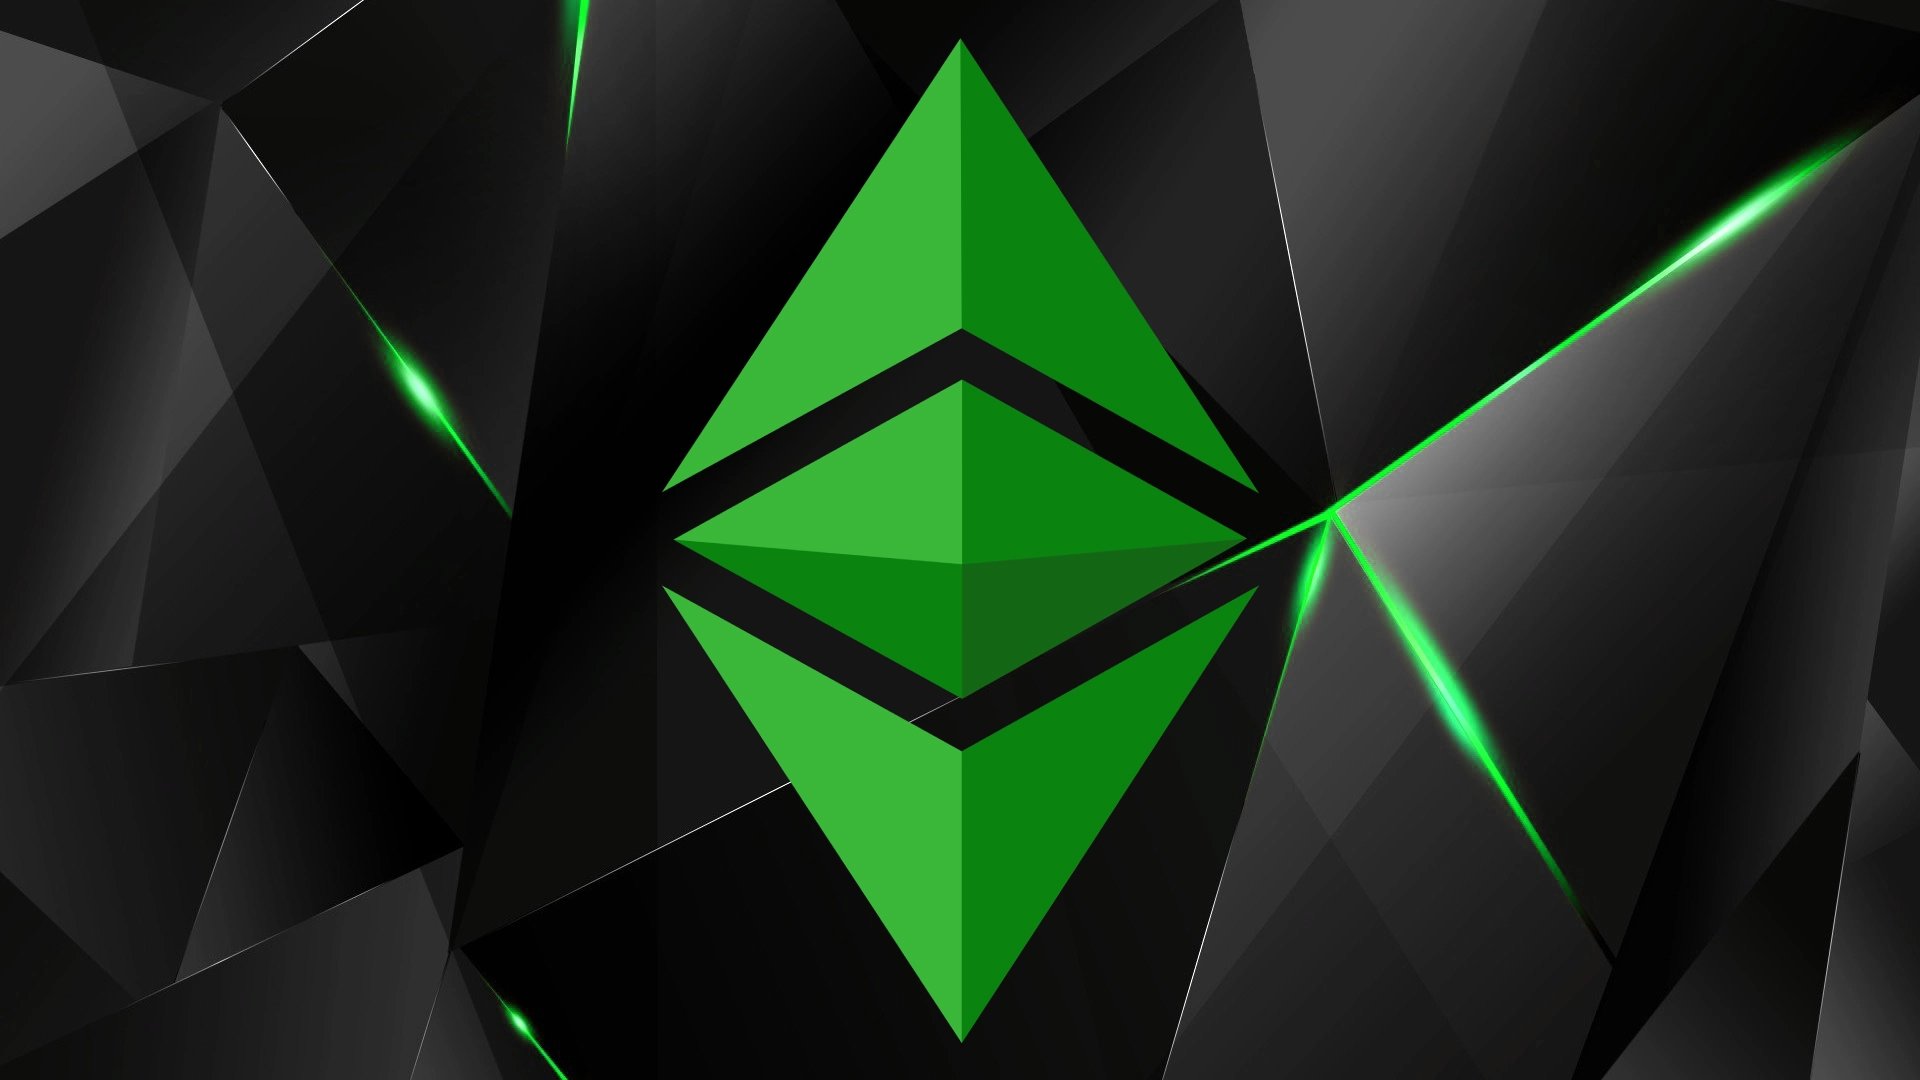 Buy Ethereum Classic Guide